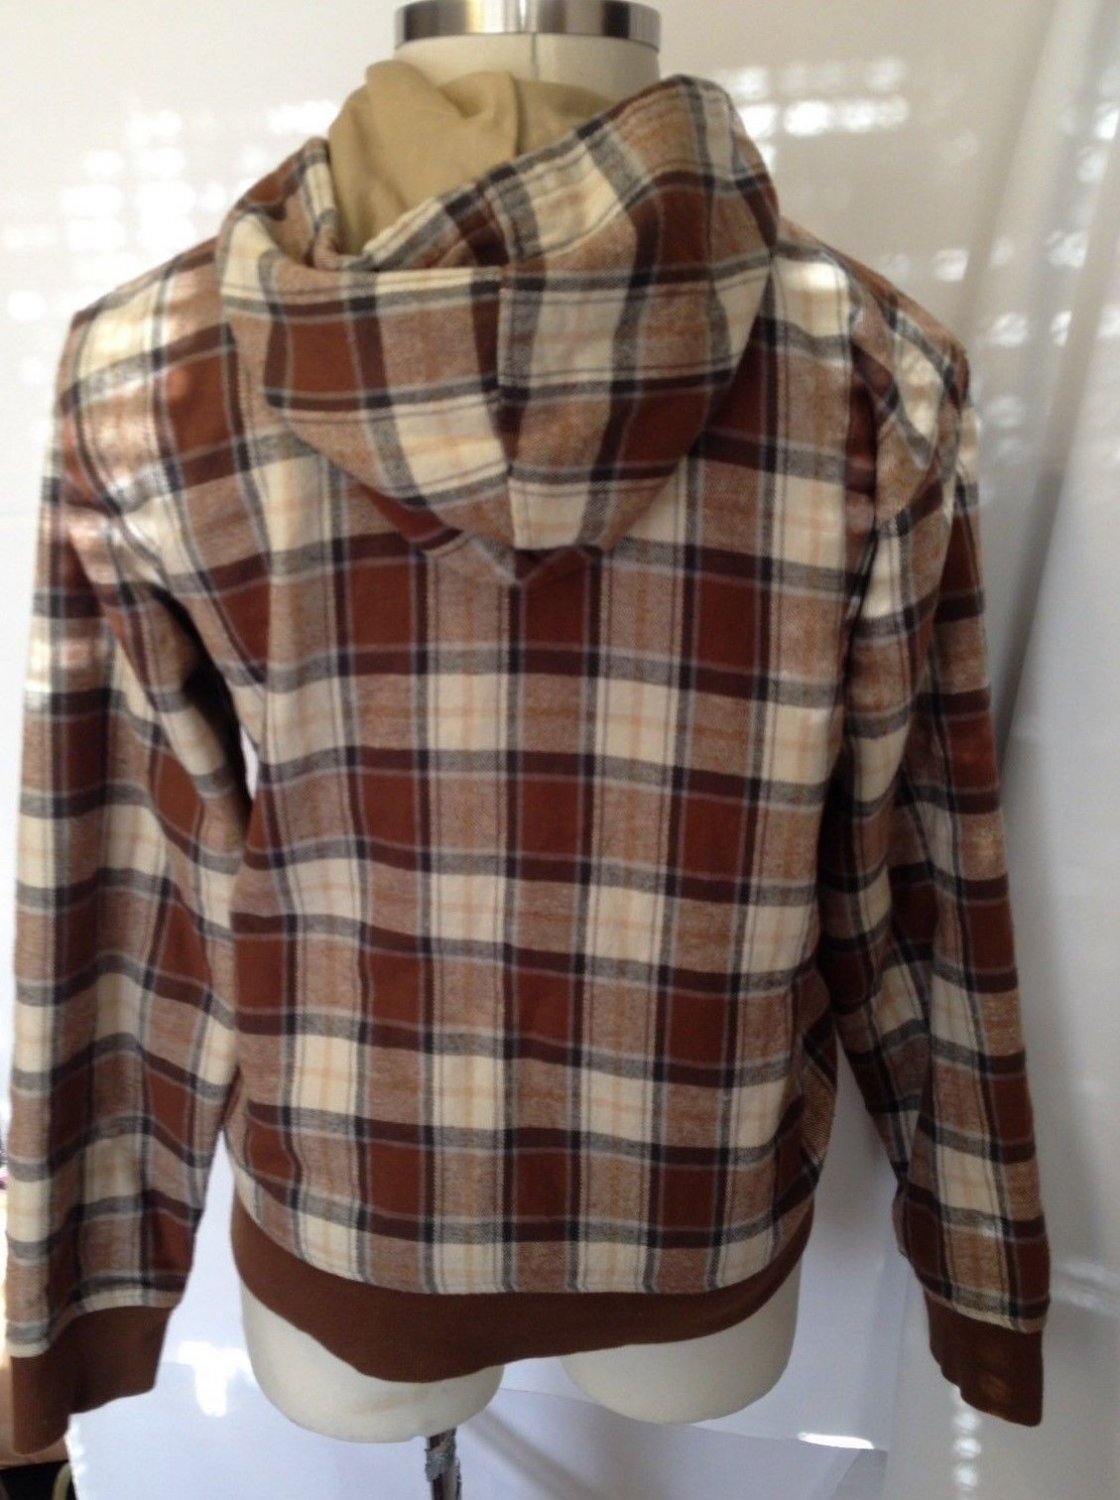 MACHINE CLOTHING COMPANY Mens Insulated Flannel Jacket Zip Up Brown ...